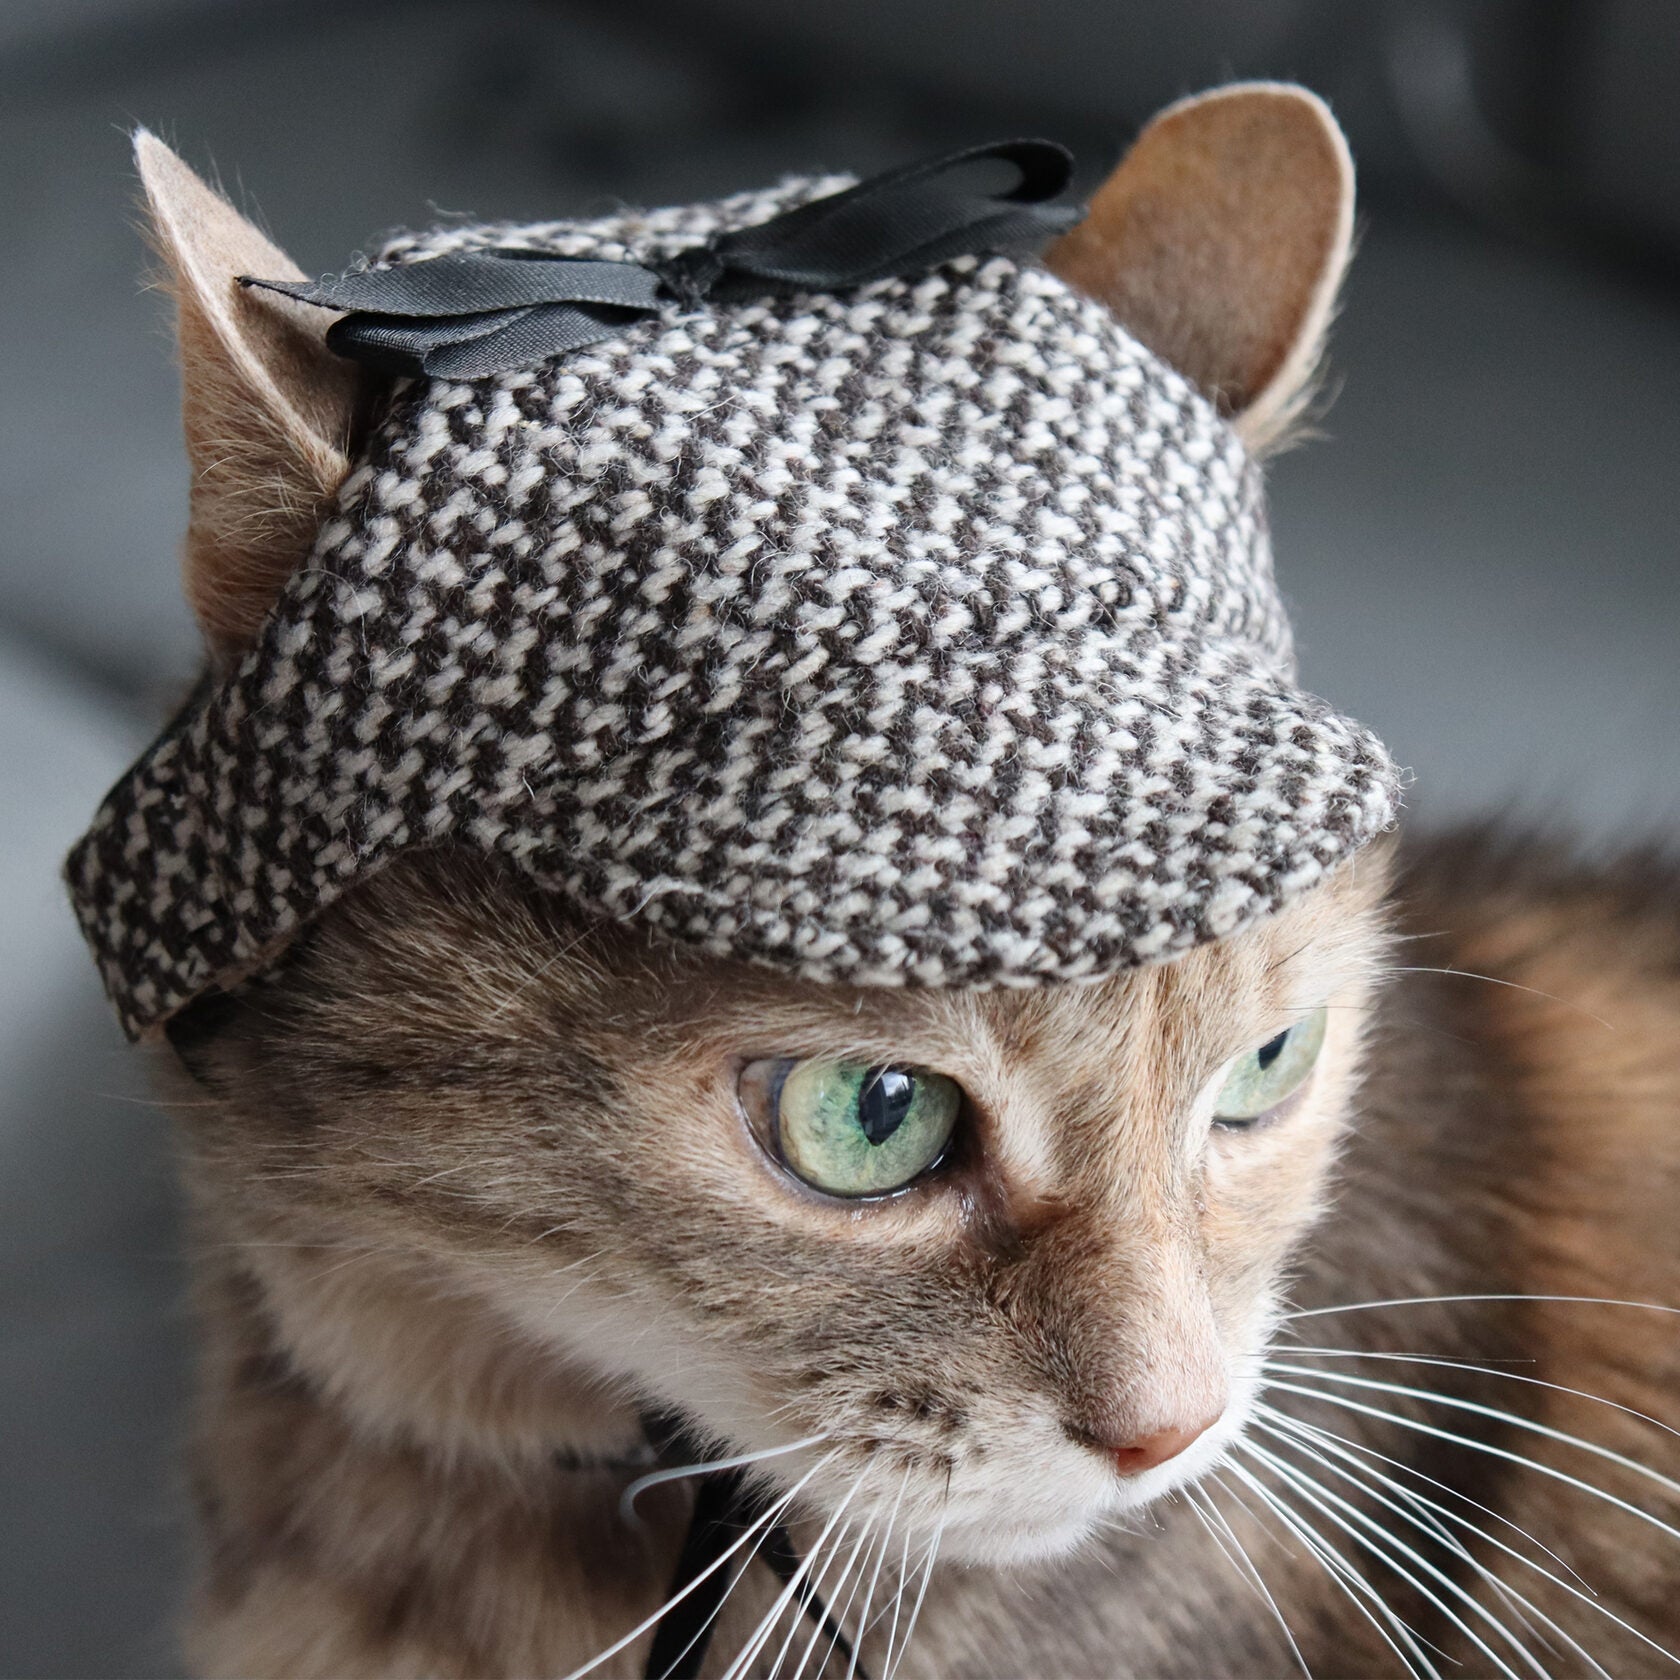 Black and White tweed hat for cat – ALLCATSGOOD